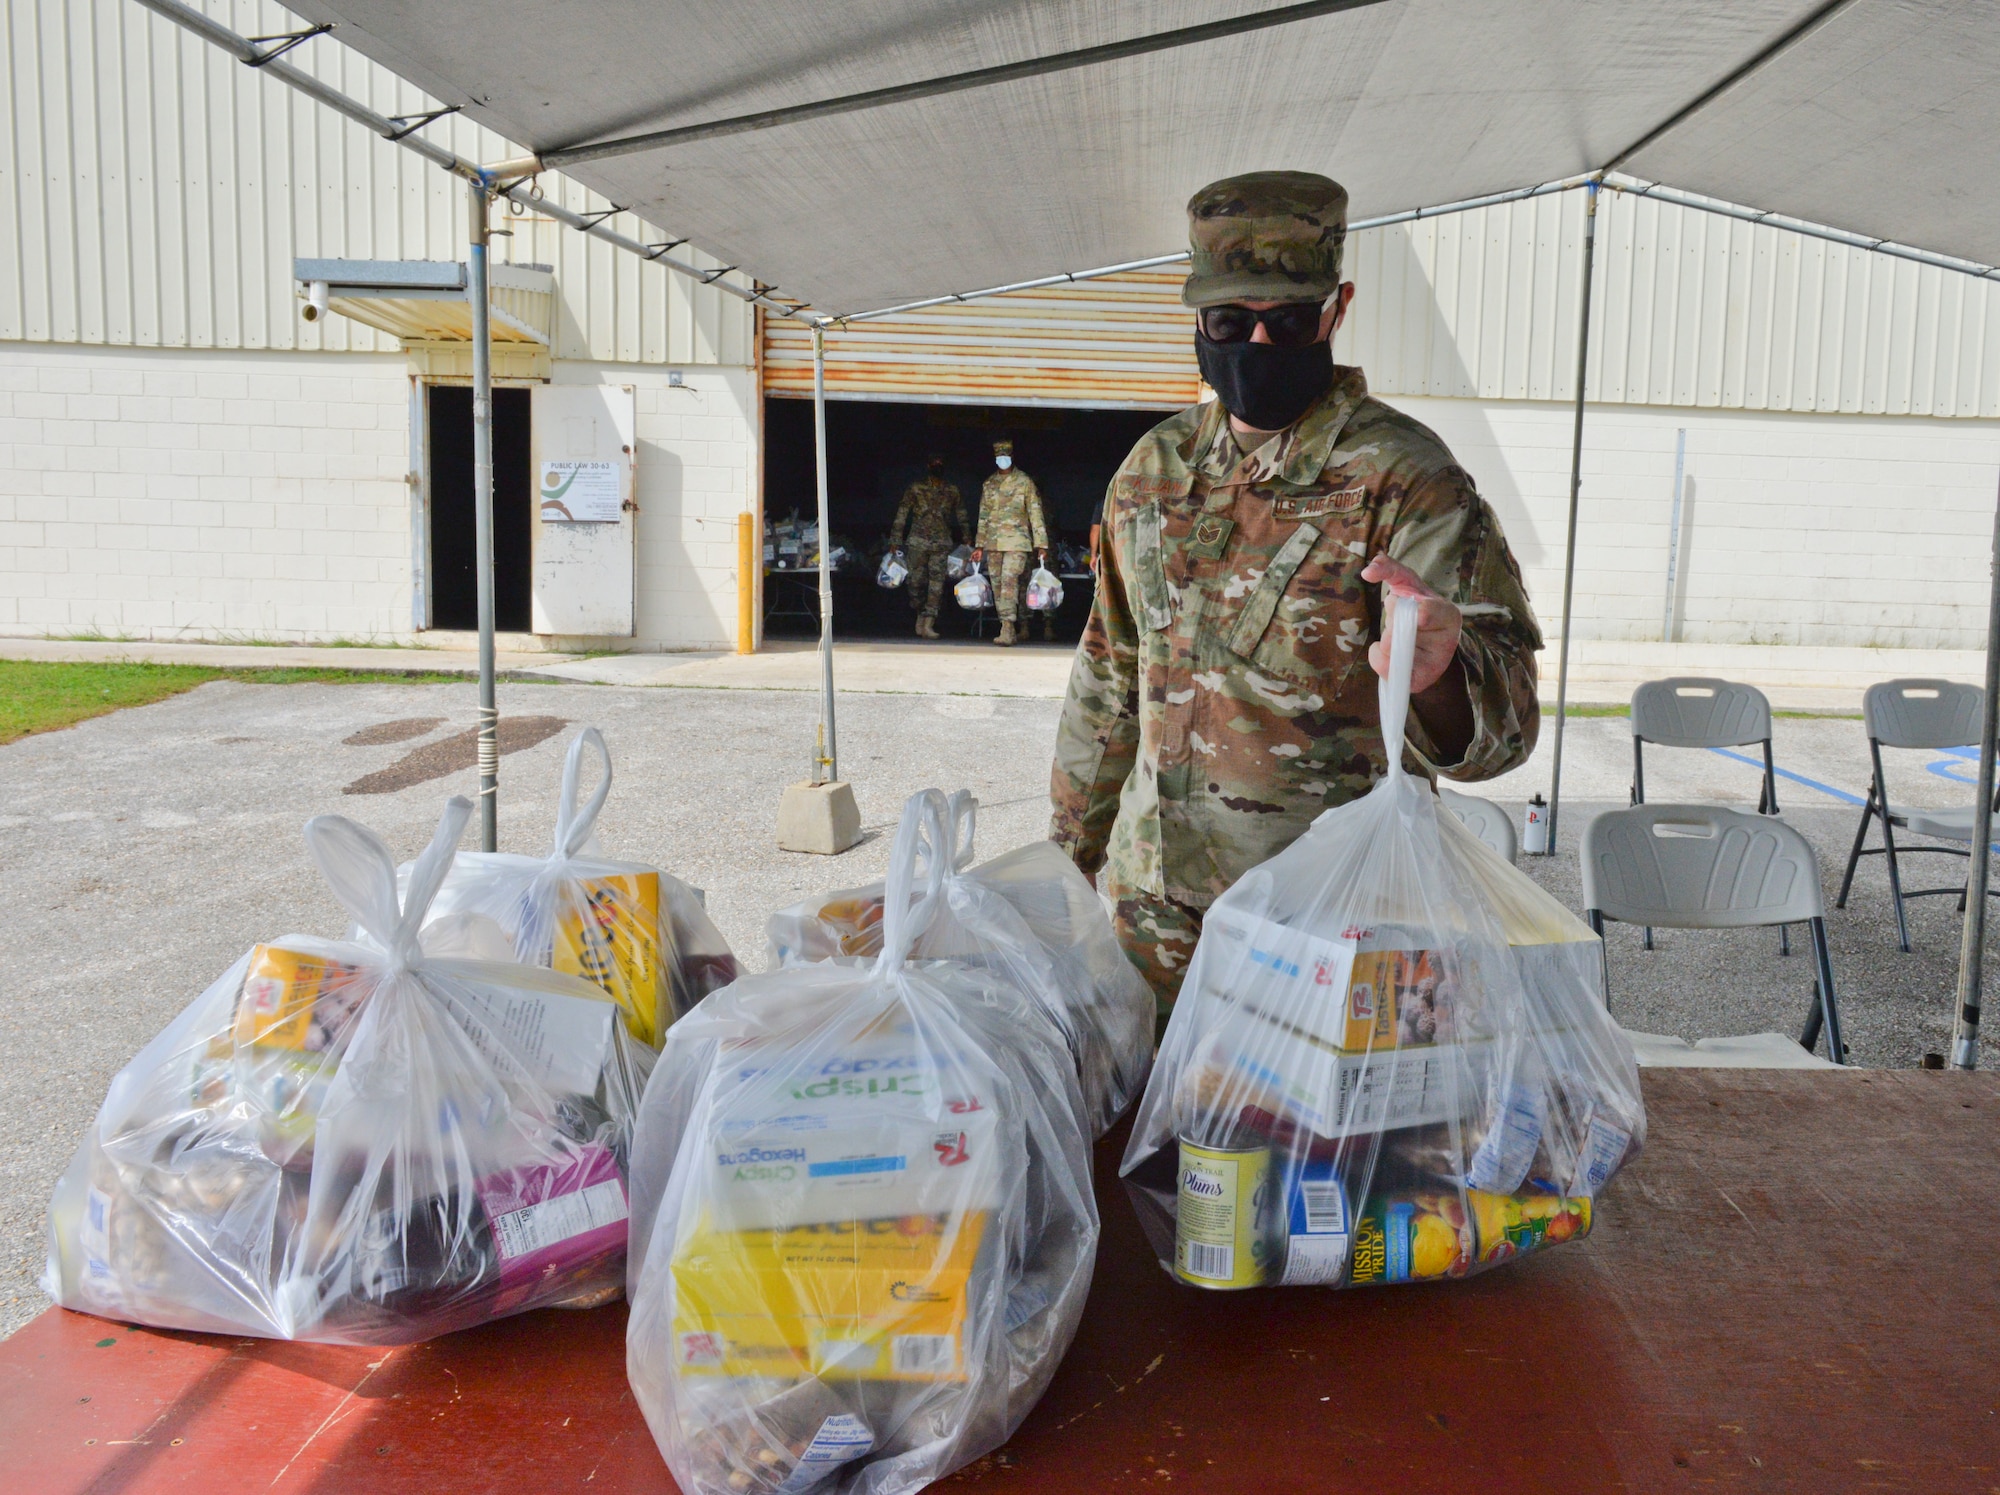 U.S. Air Force Staff Sgt. Nicholas Killian, 36th Civil Engineering Squadron workforce manager, places food commodities onto a table in preparation for a COVID-19 relief food distribution event at the community gym in Yona, Guam, April 15, 2021. The 36th CES is Yona’s sister squadron, as part of the Andersen Air Force Base Sister Village Sister Squadron program, through which squadron members collaborate with Guam residents in activities to strengthen their friendship and partnership. (U.S. Air Force photo by Alana Chargualaf)